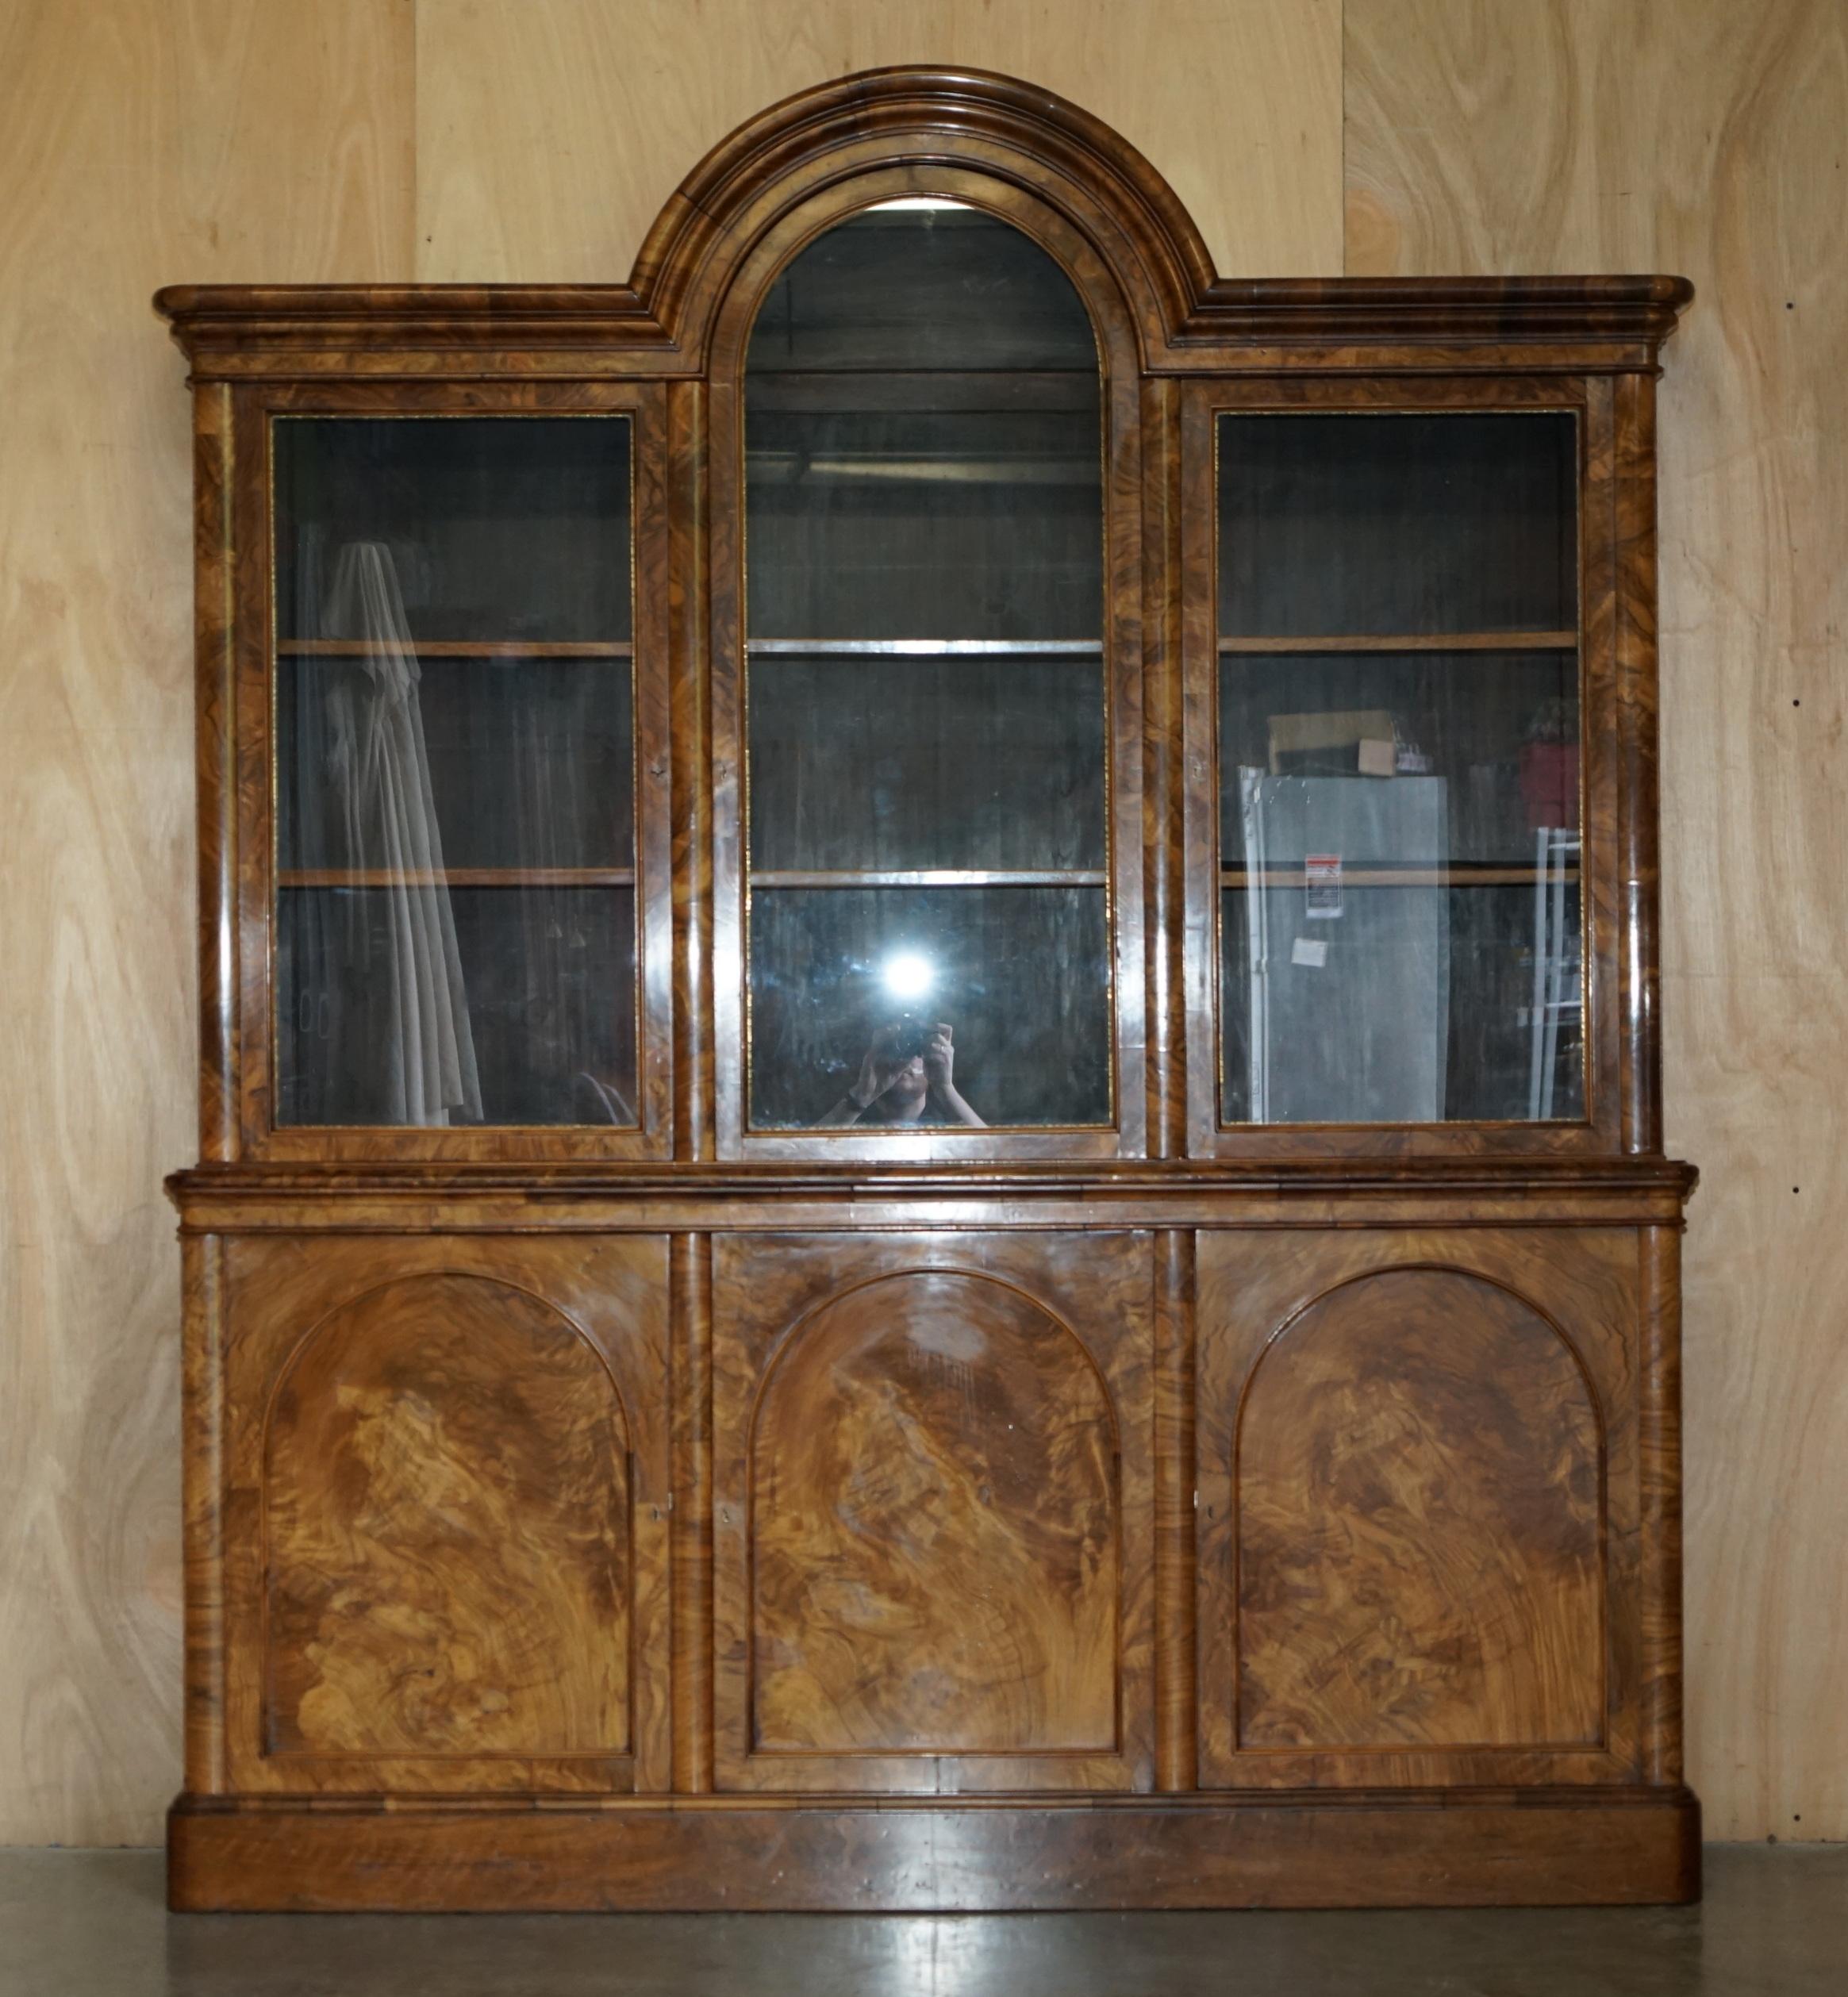 Royal House Antiques

Royal House Antiques is delighted to offer for sale this sublime circa 1860 Antique Victorian Burr Walnut Library bookcase with Steeple top made in the Gothic Revival taste

Please note the delivery fee listed is just a guide,